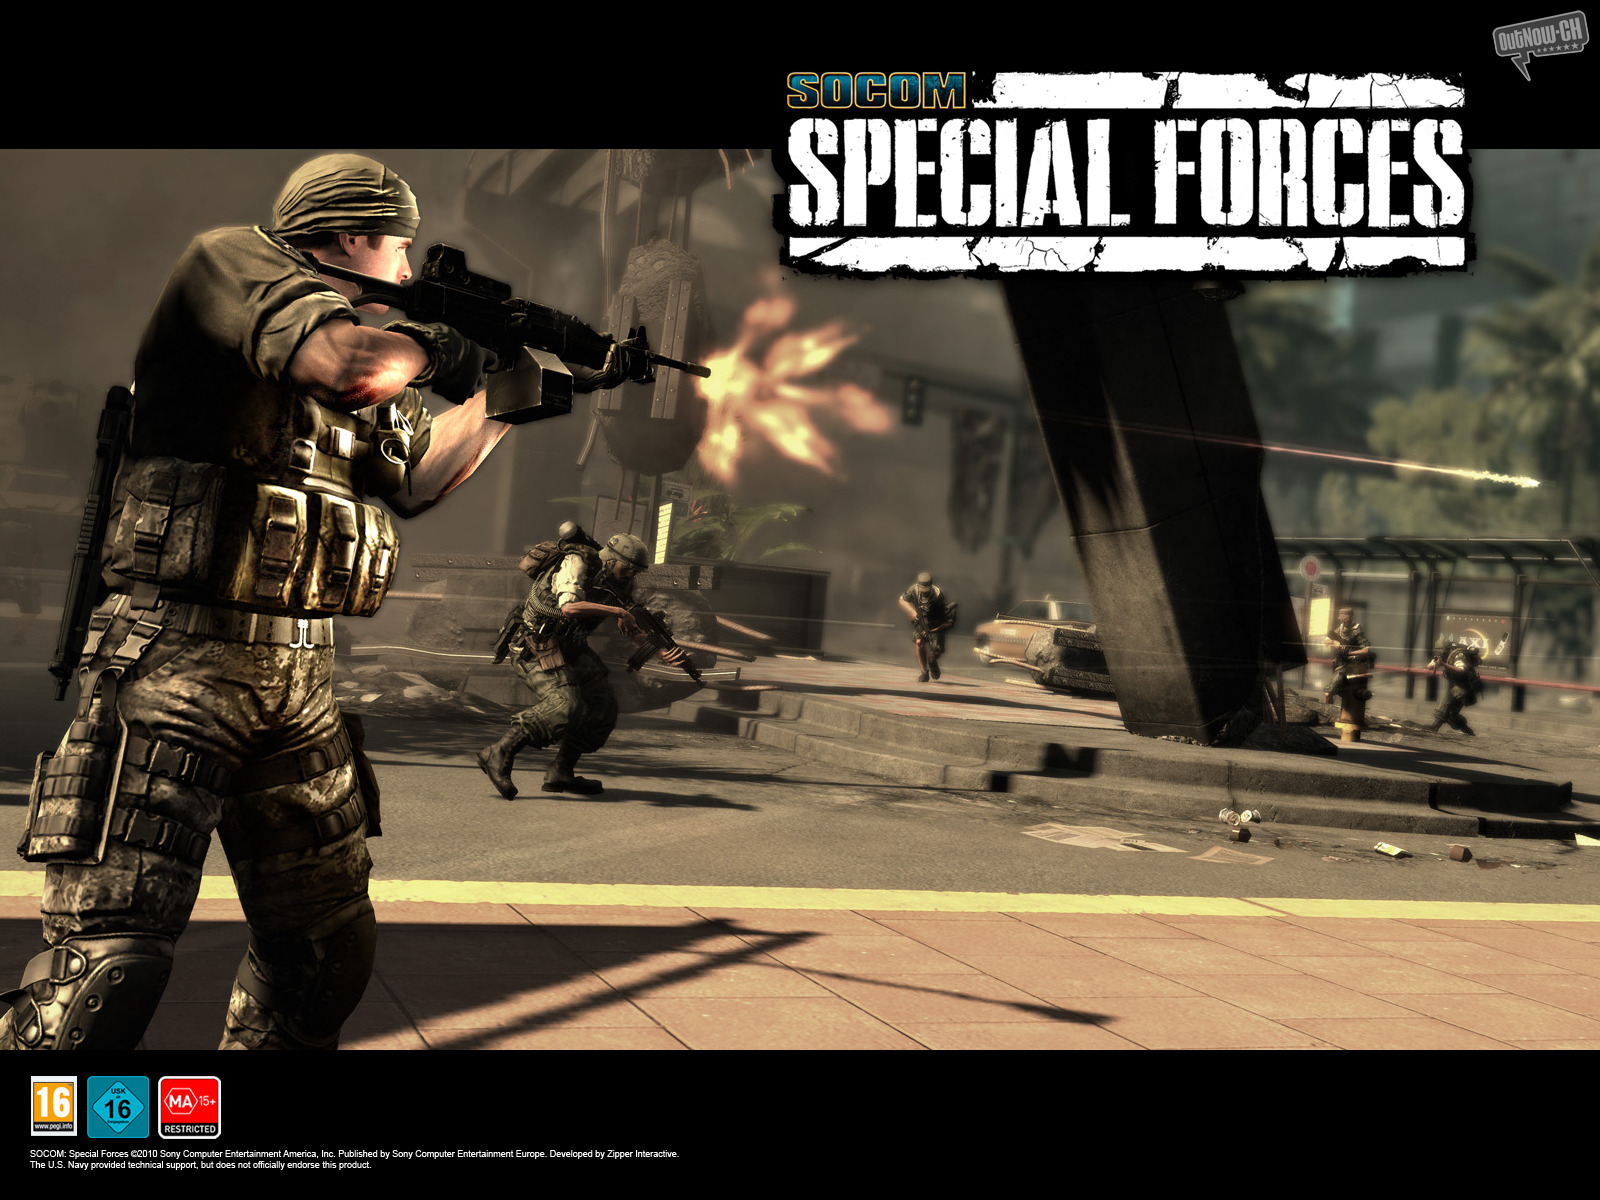 video game, socom: special forces, game, gun, socom, soldier, special forces wallpapers for tablet